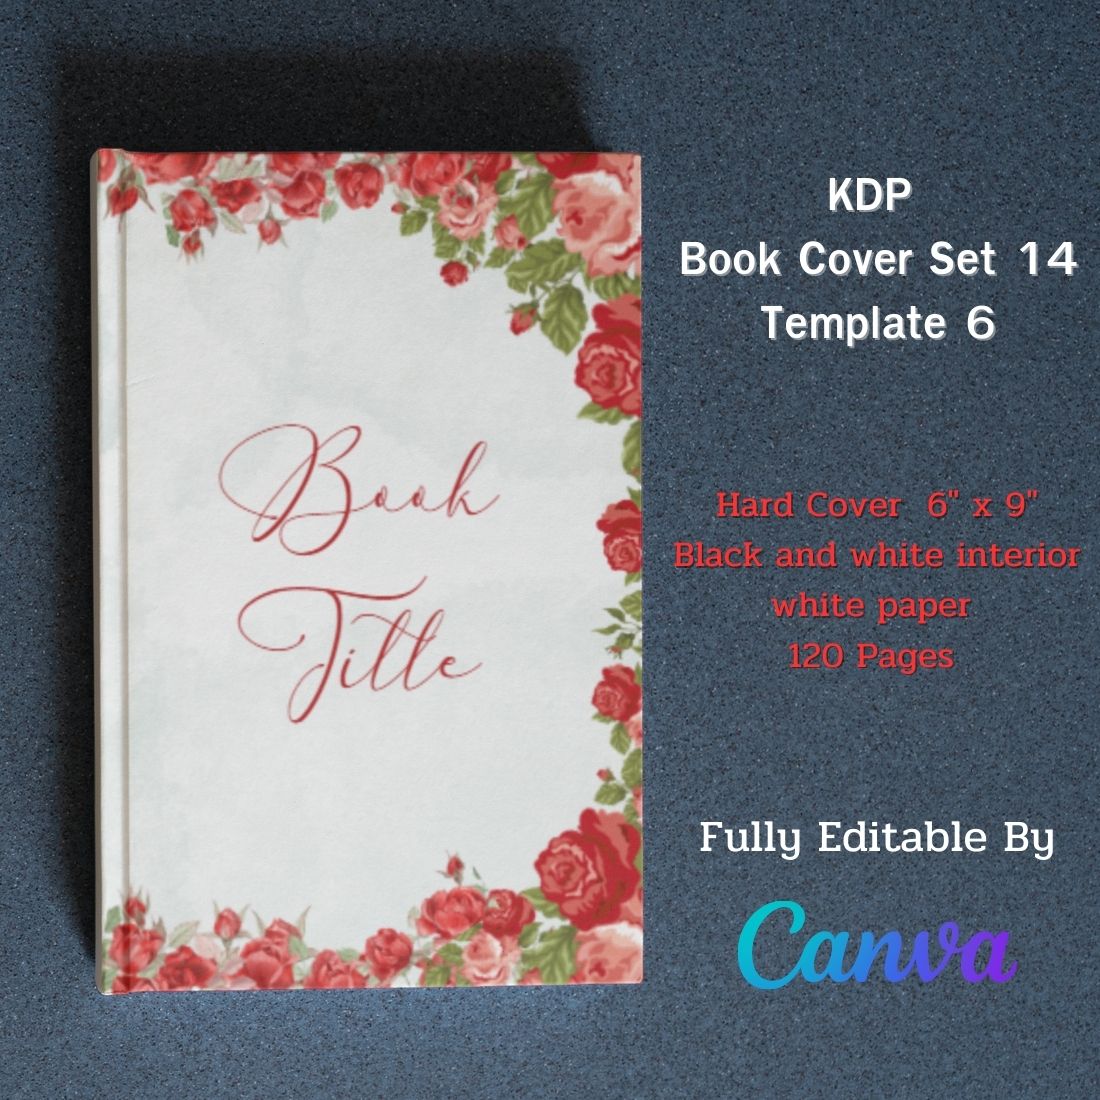 Book cover set 14 template 6.